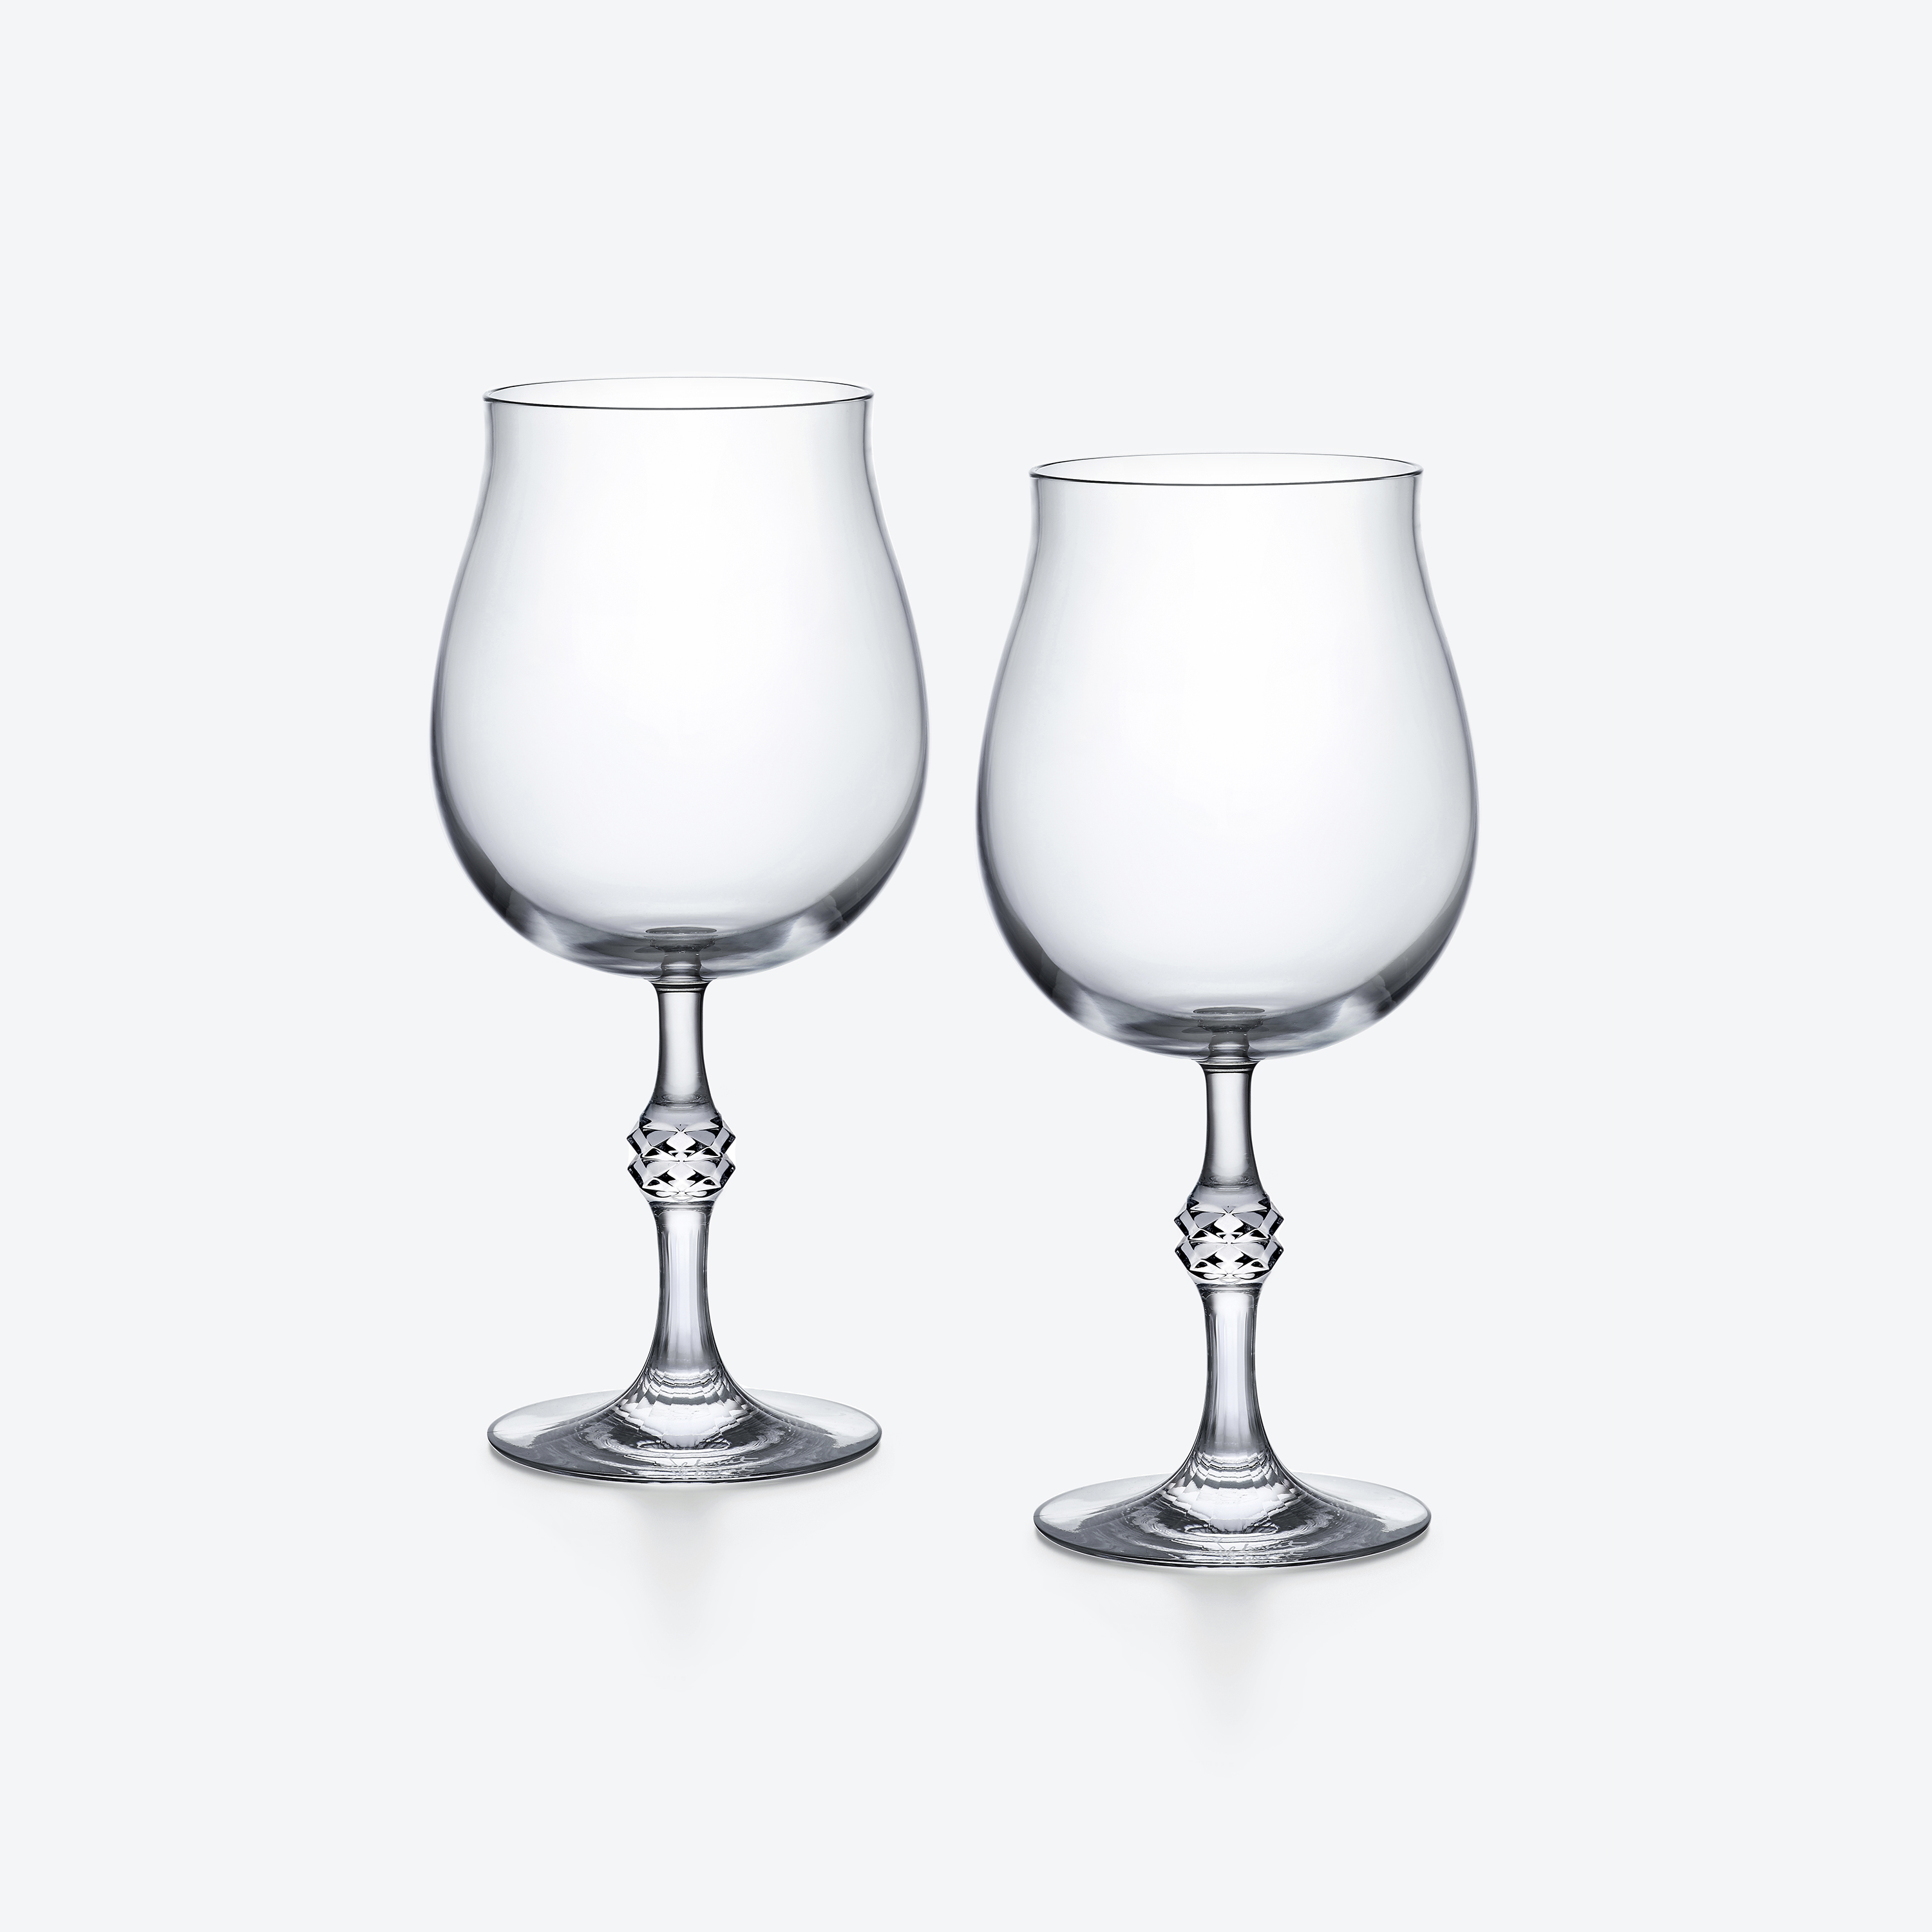 Passion Wine Glasses | Baccarat United States